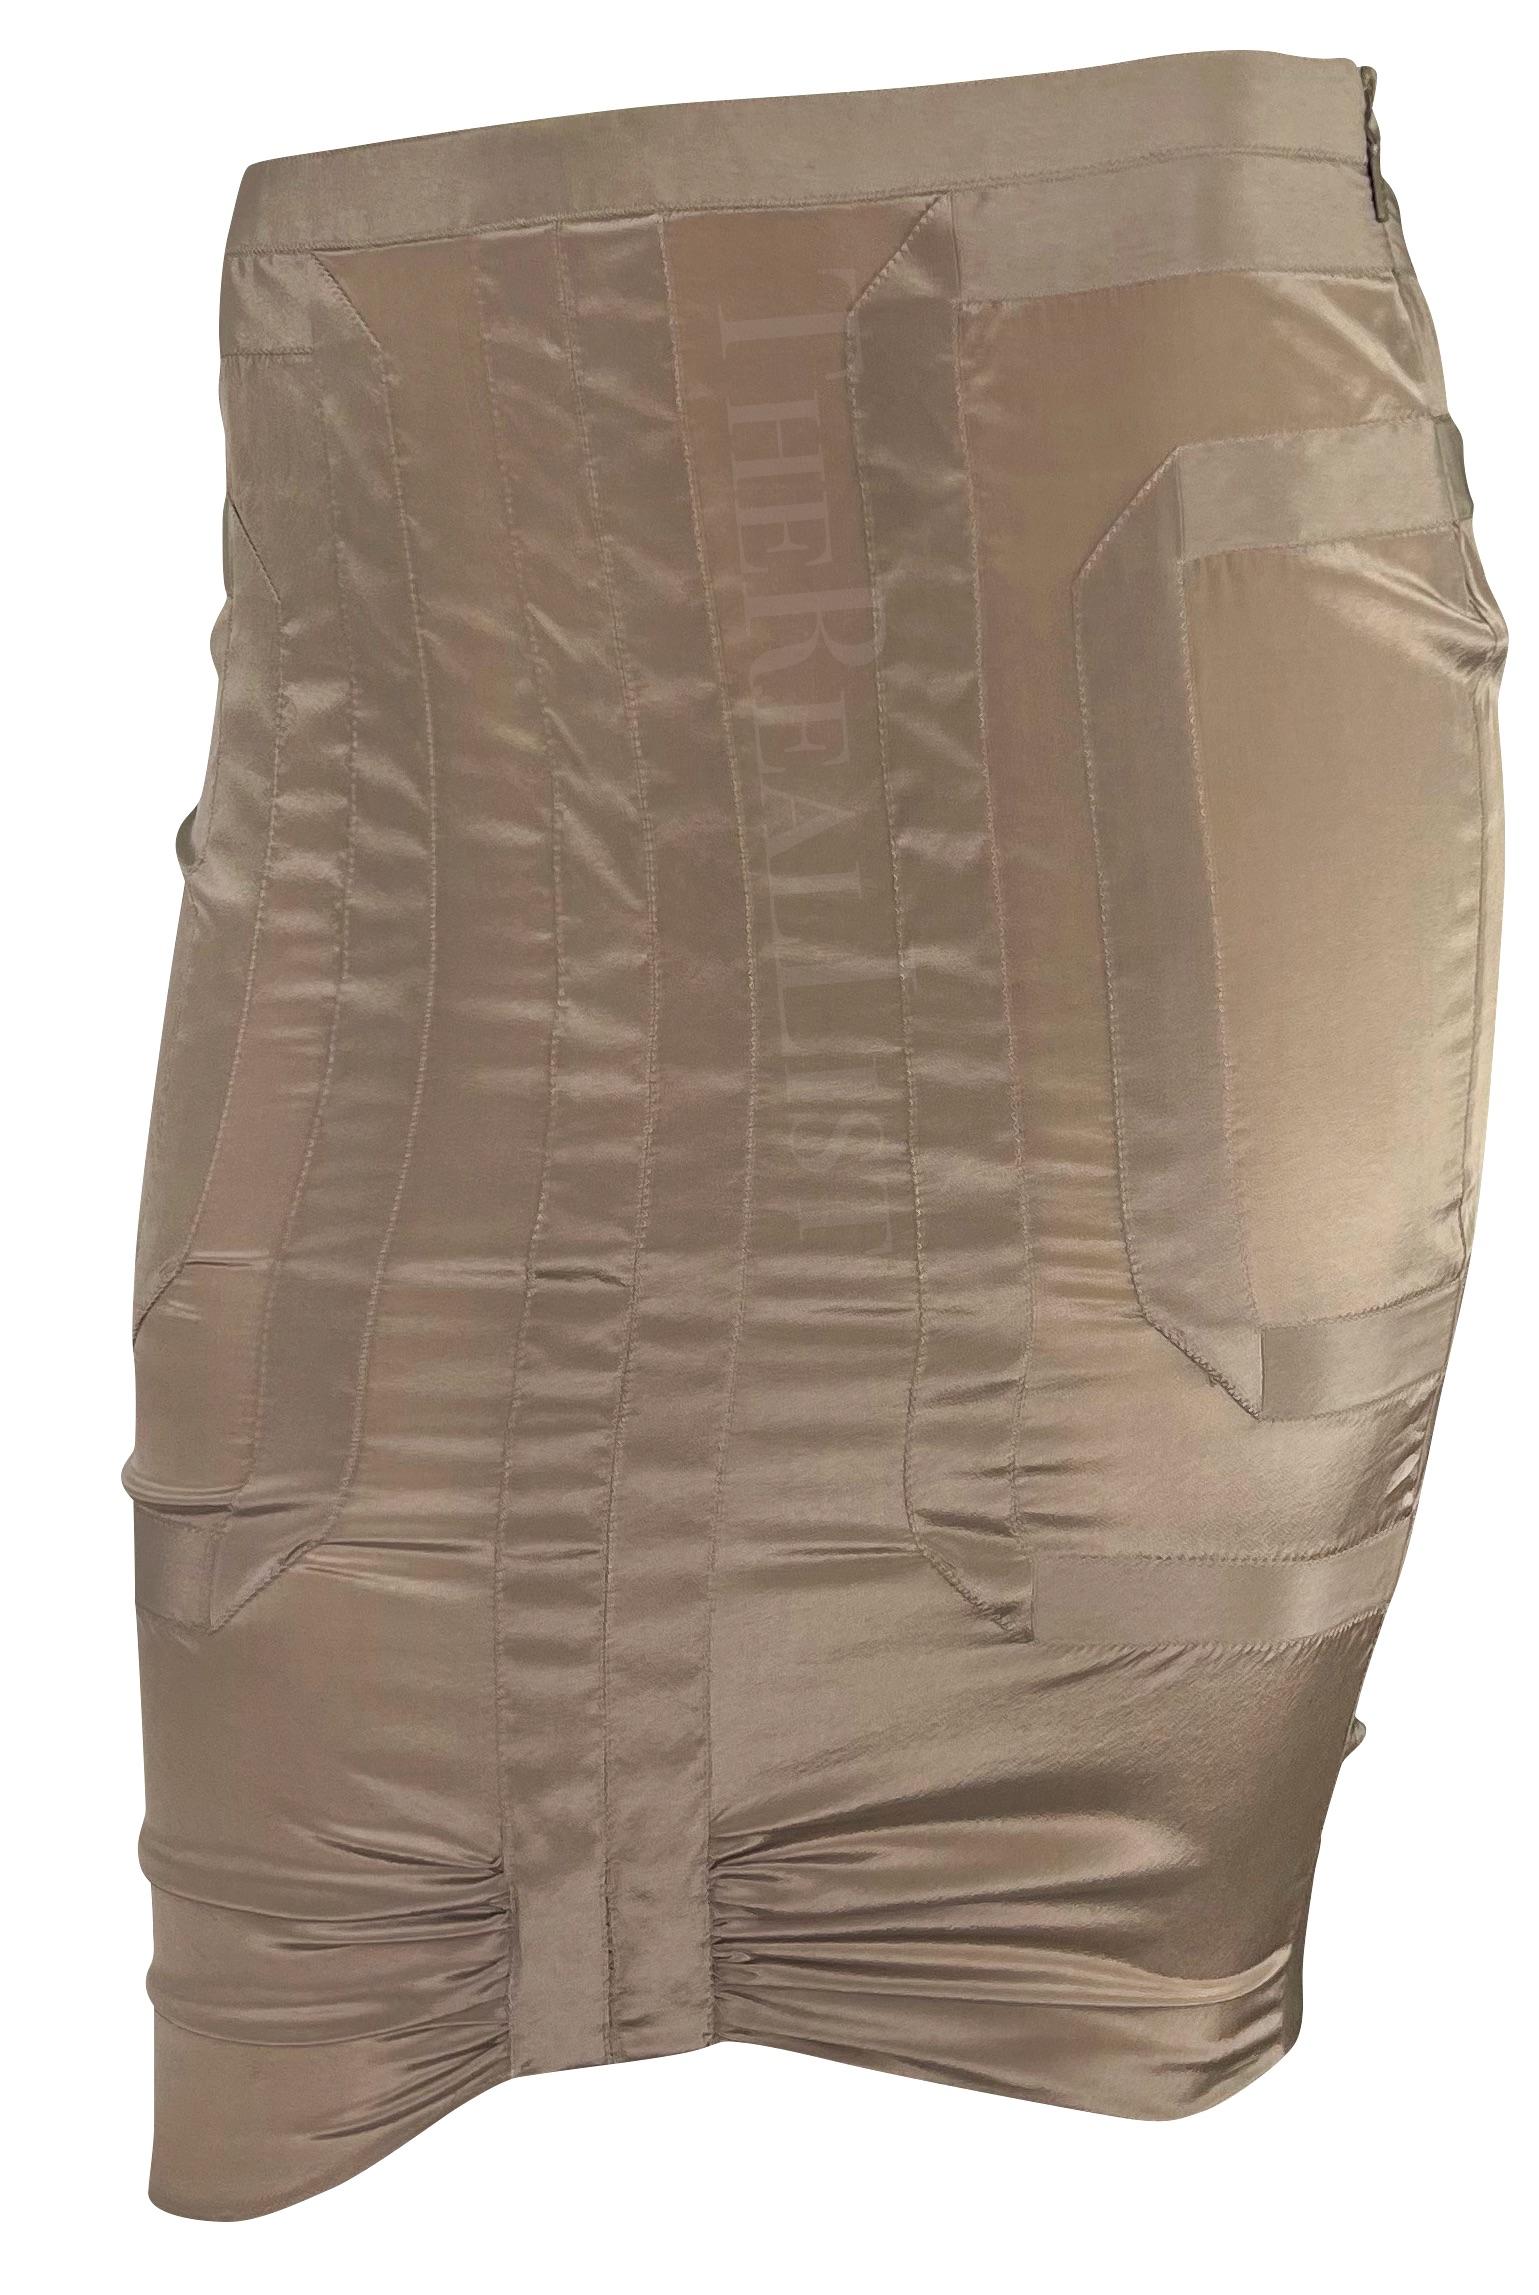 Presenting a beautiful taupe Gucci skirt, designed by Alessandra Facchinetti. From the Spring/Summer 2005 collection, this chic satin skirt showcases angular ribbon accents and delicate ruching above the hem, exuding modern allure. Preserved with